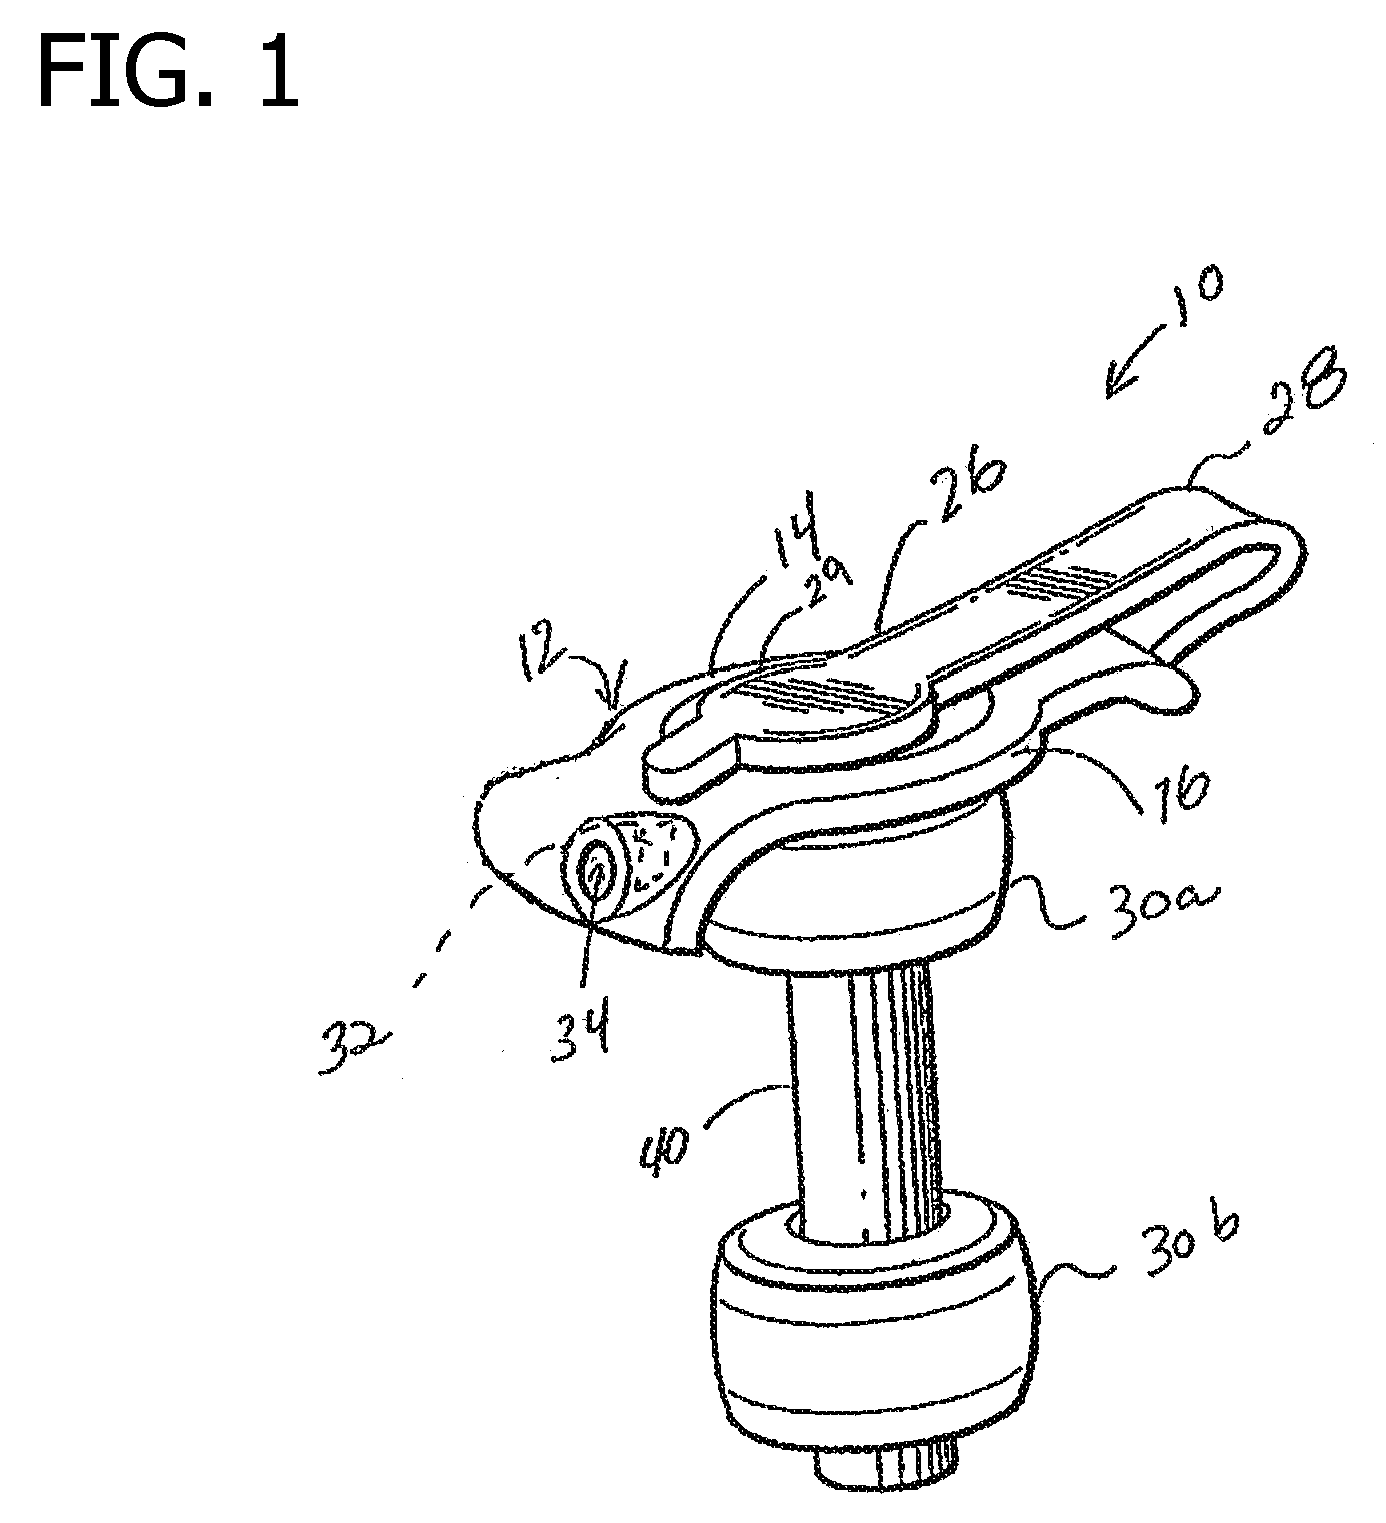 Skin level device for use with gastrostomy tube